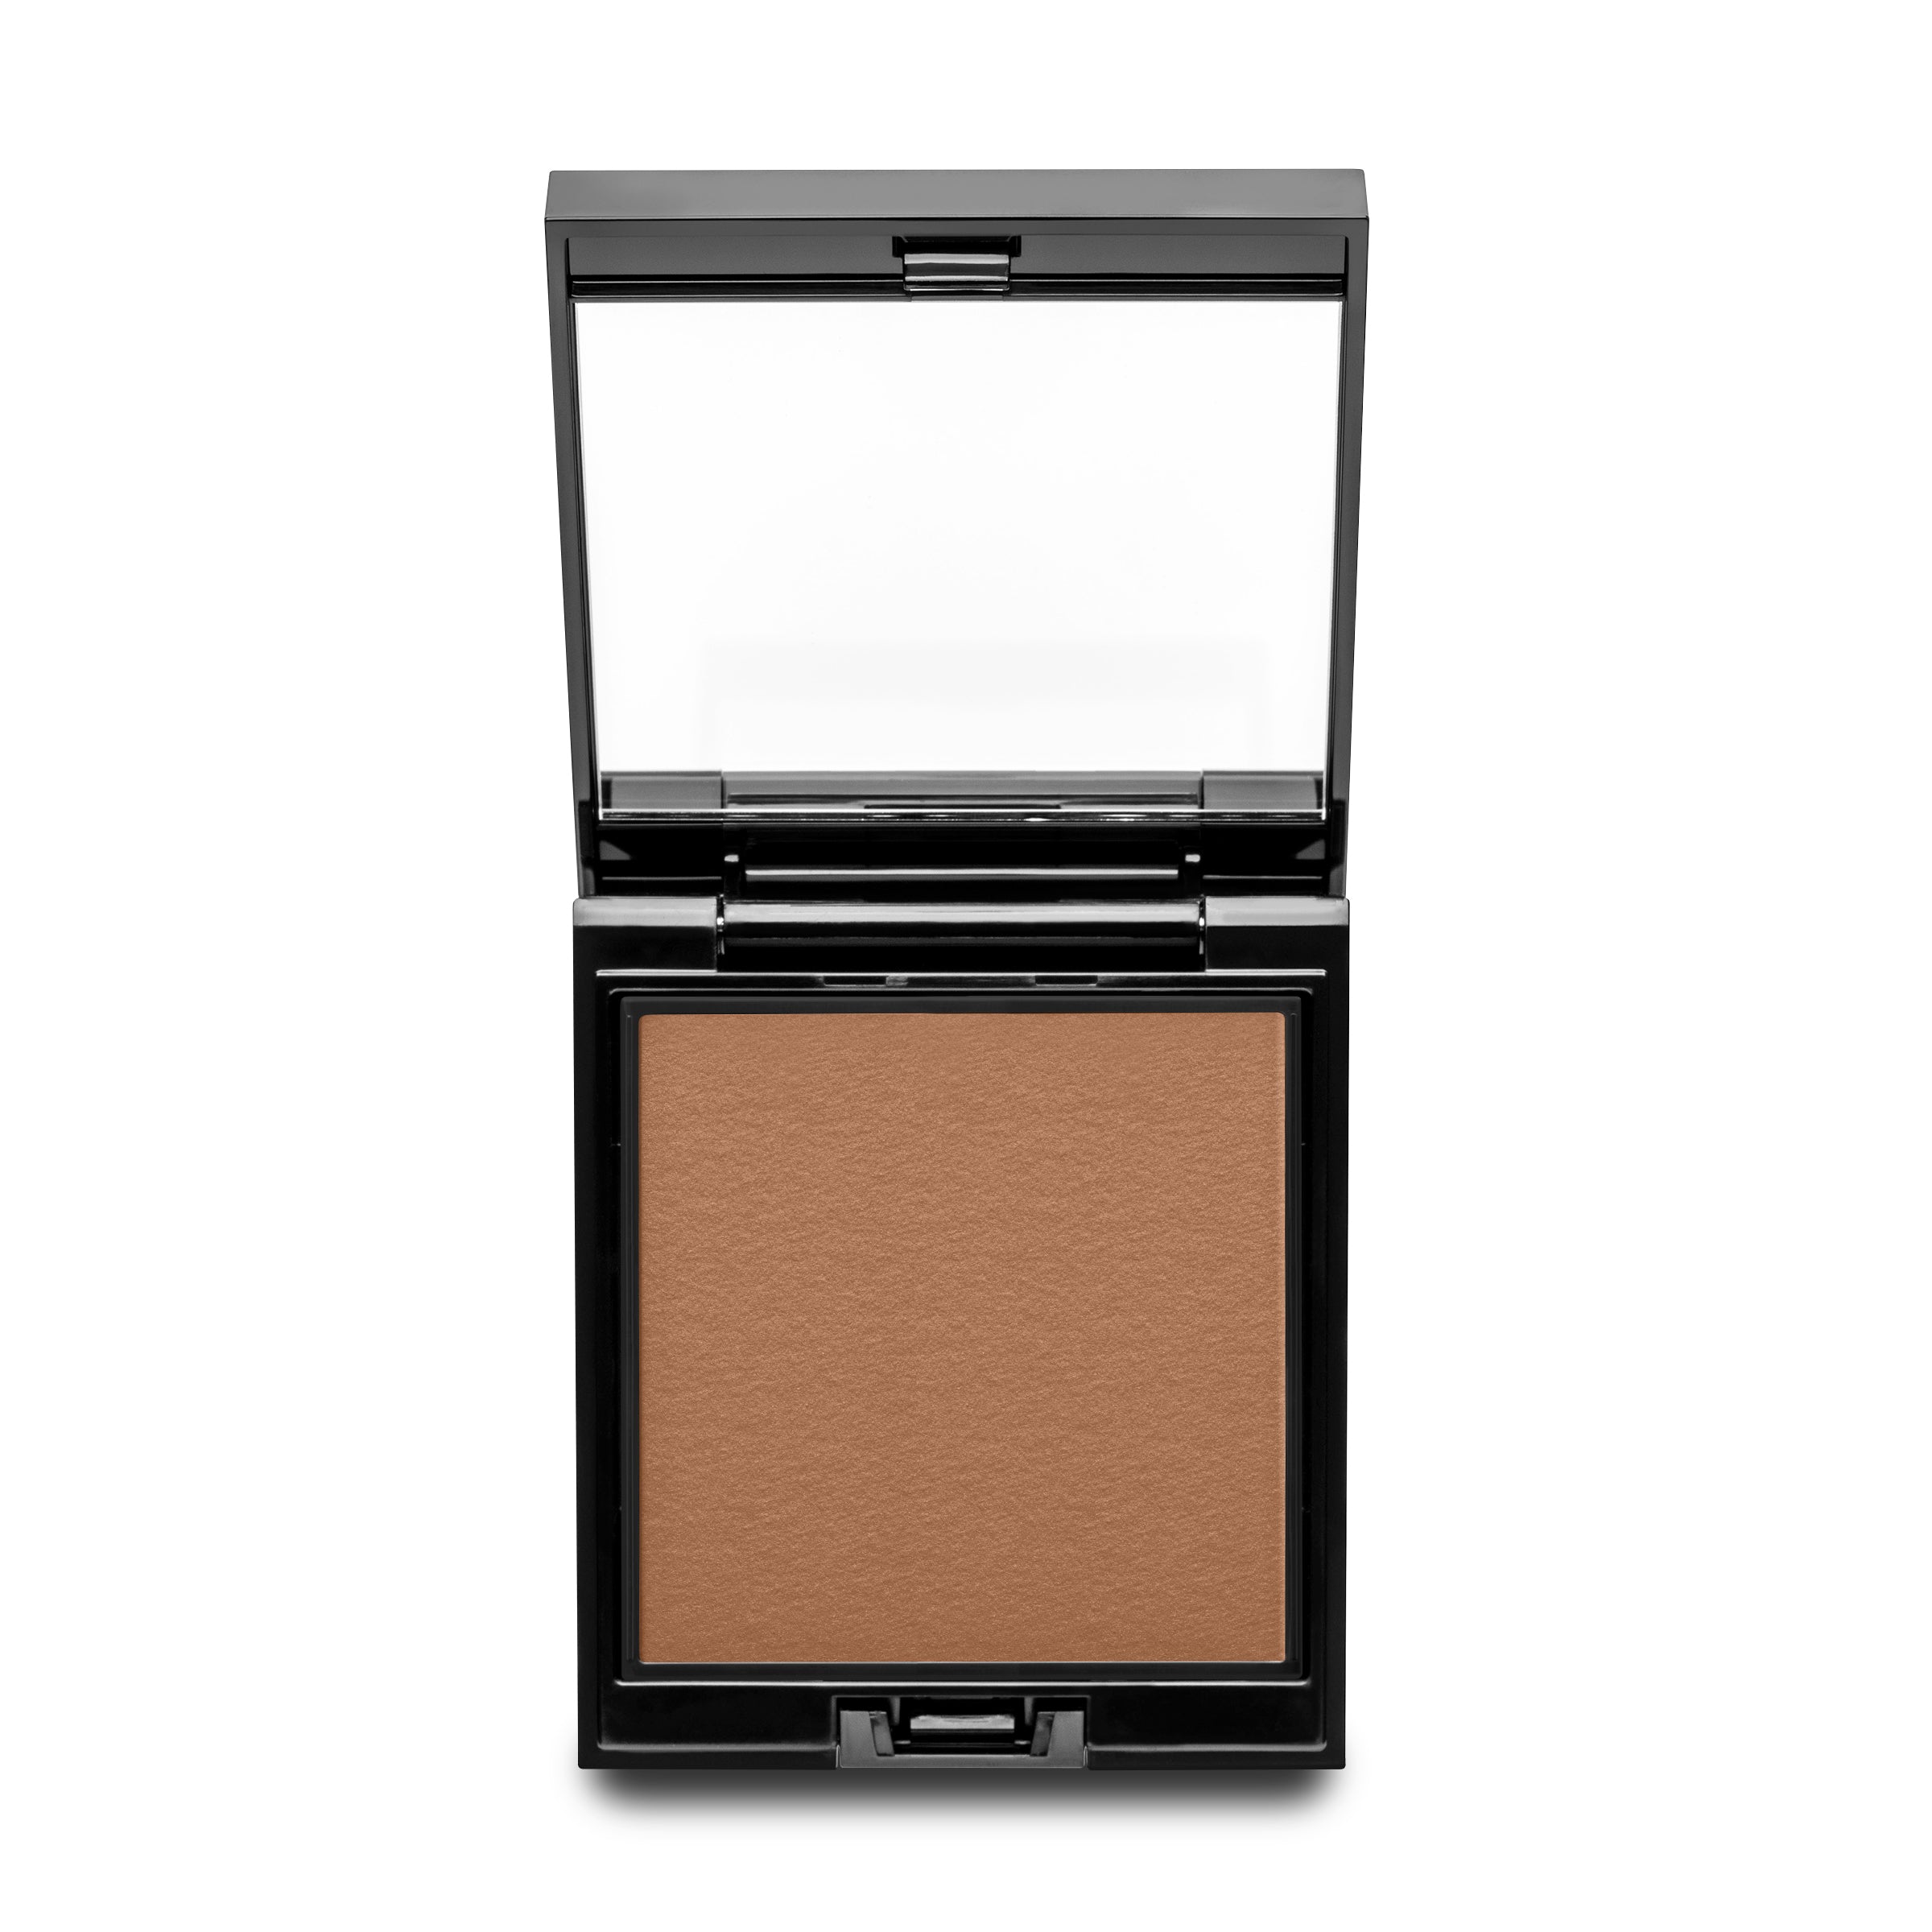 SOLEIL DOUX - NEUTRAL UNDERTONE - bronzer for light to medium complexions and neutral undertones in a satin finish